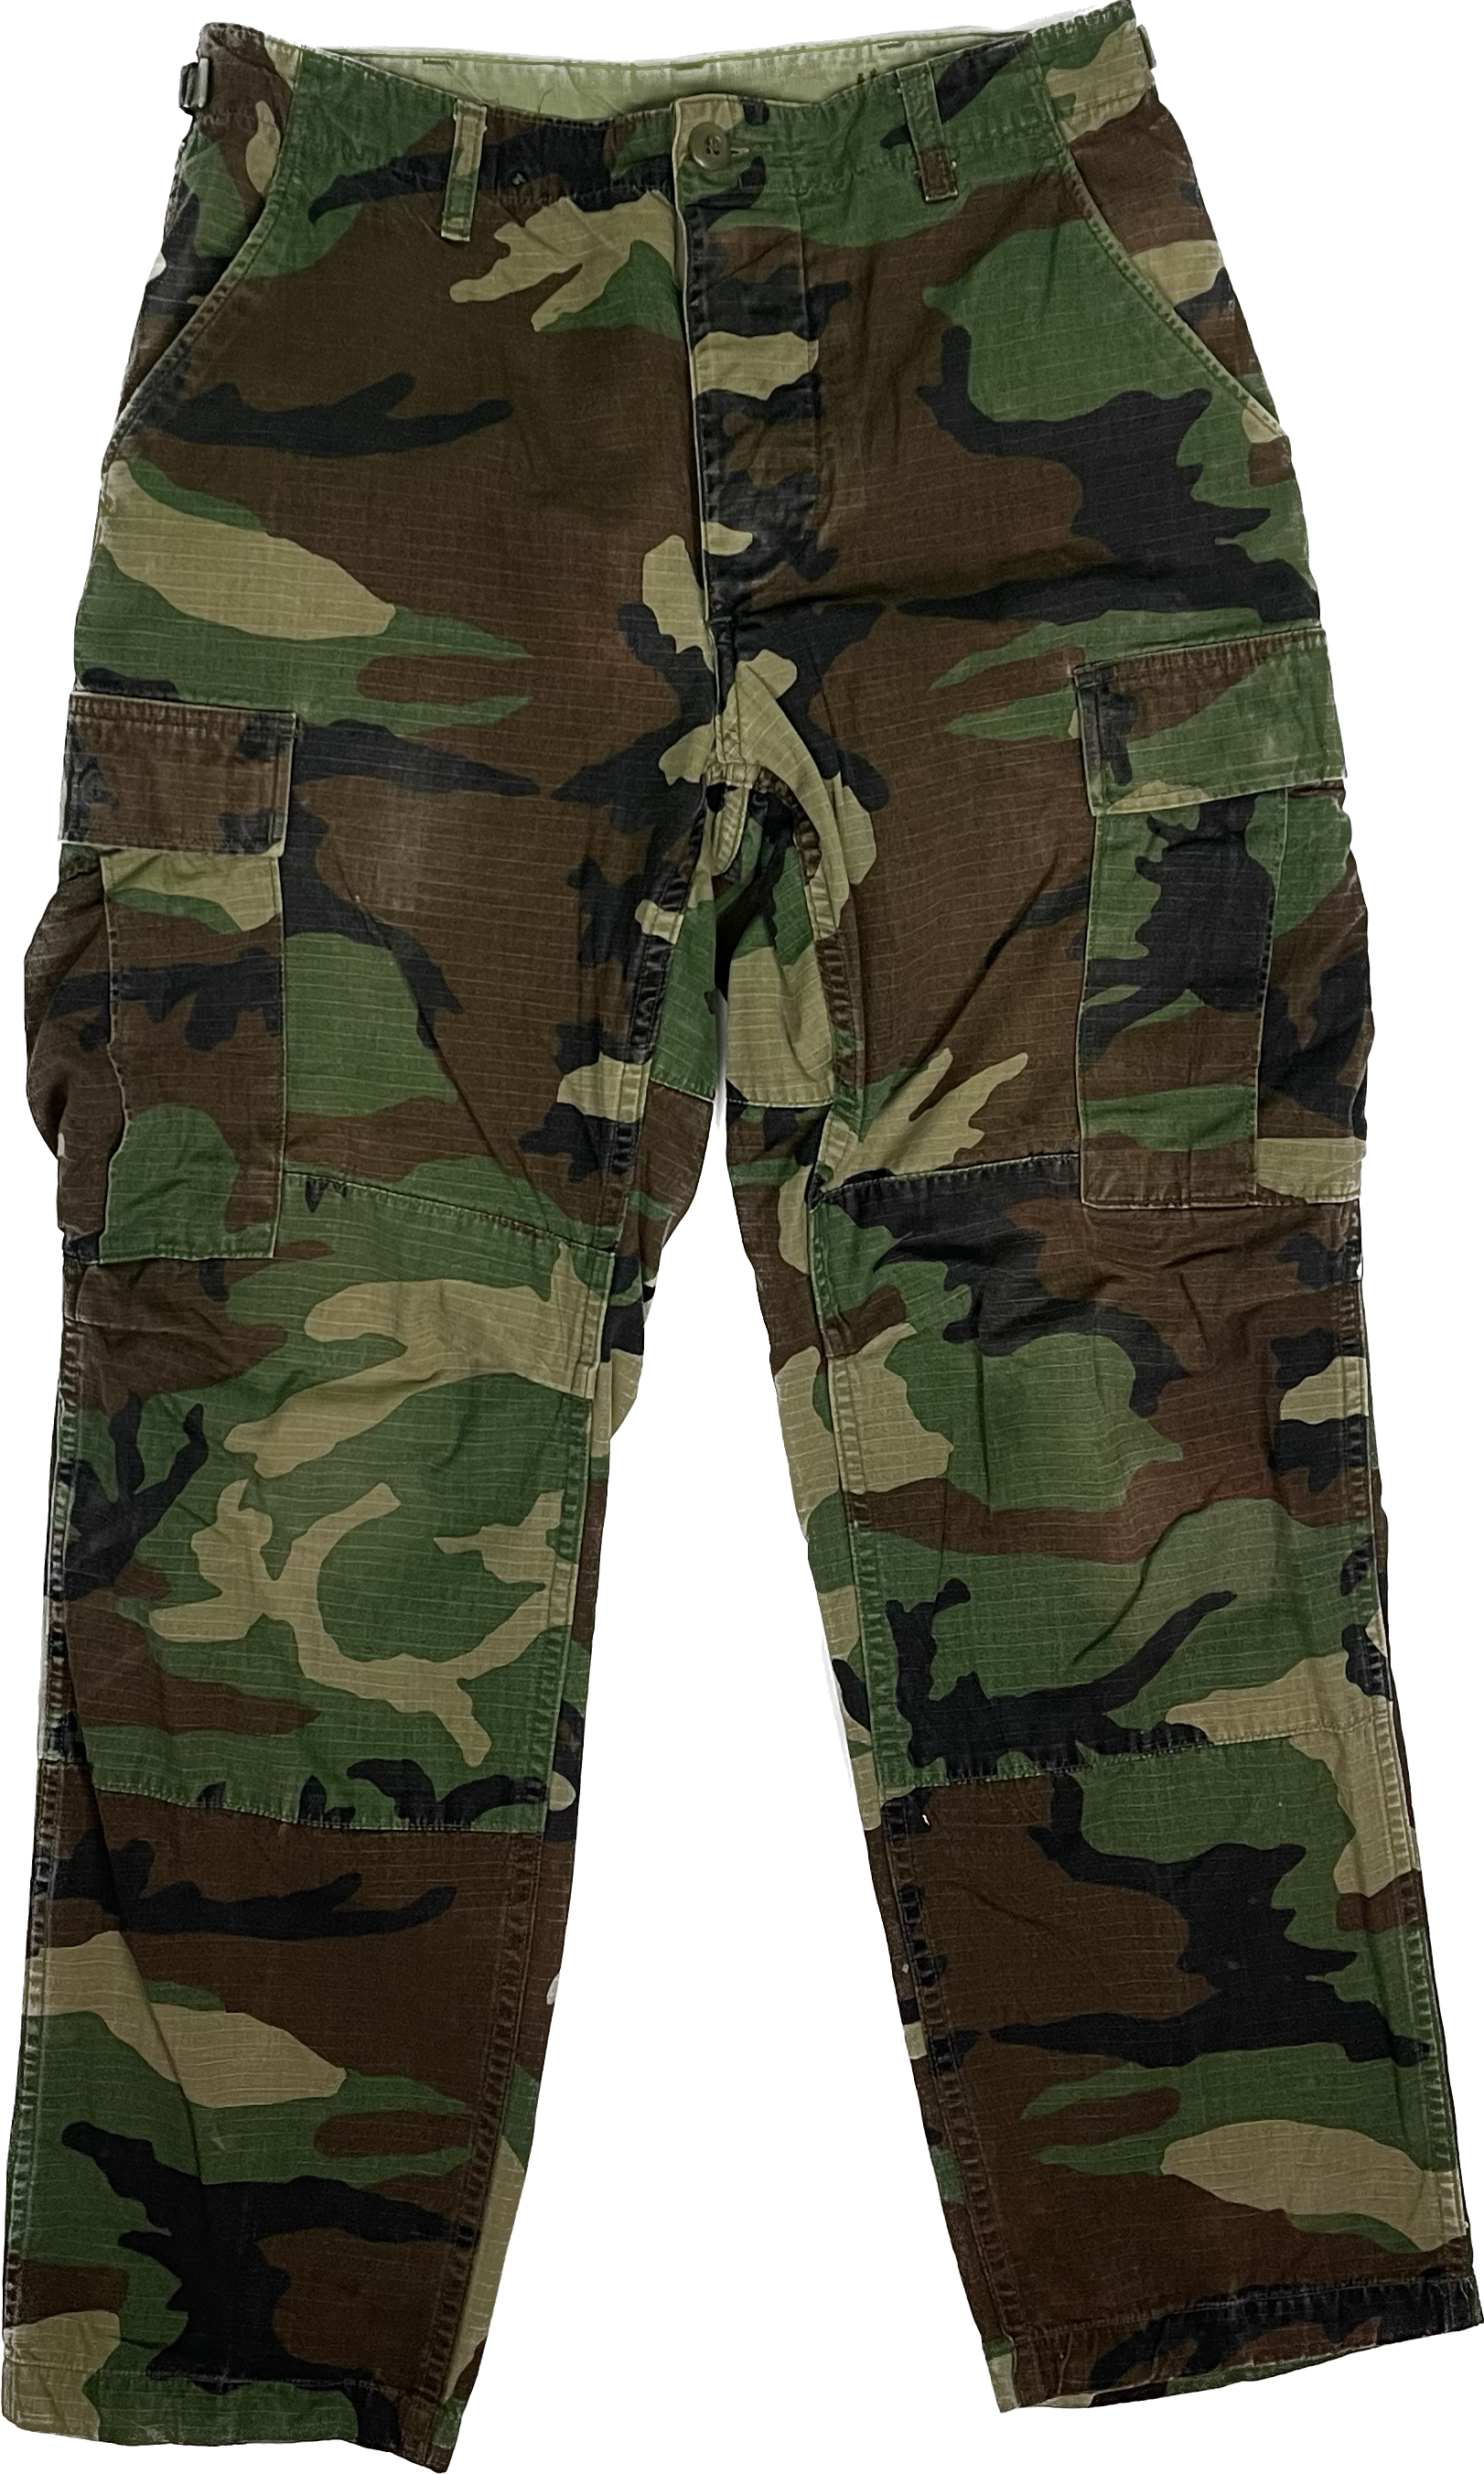 US Military Camouflage Cargo Pants